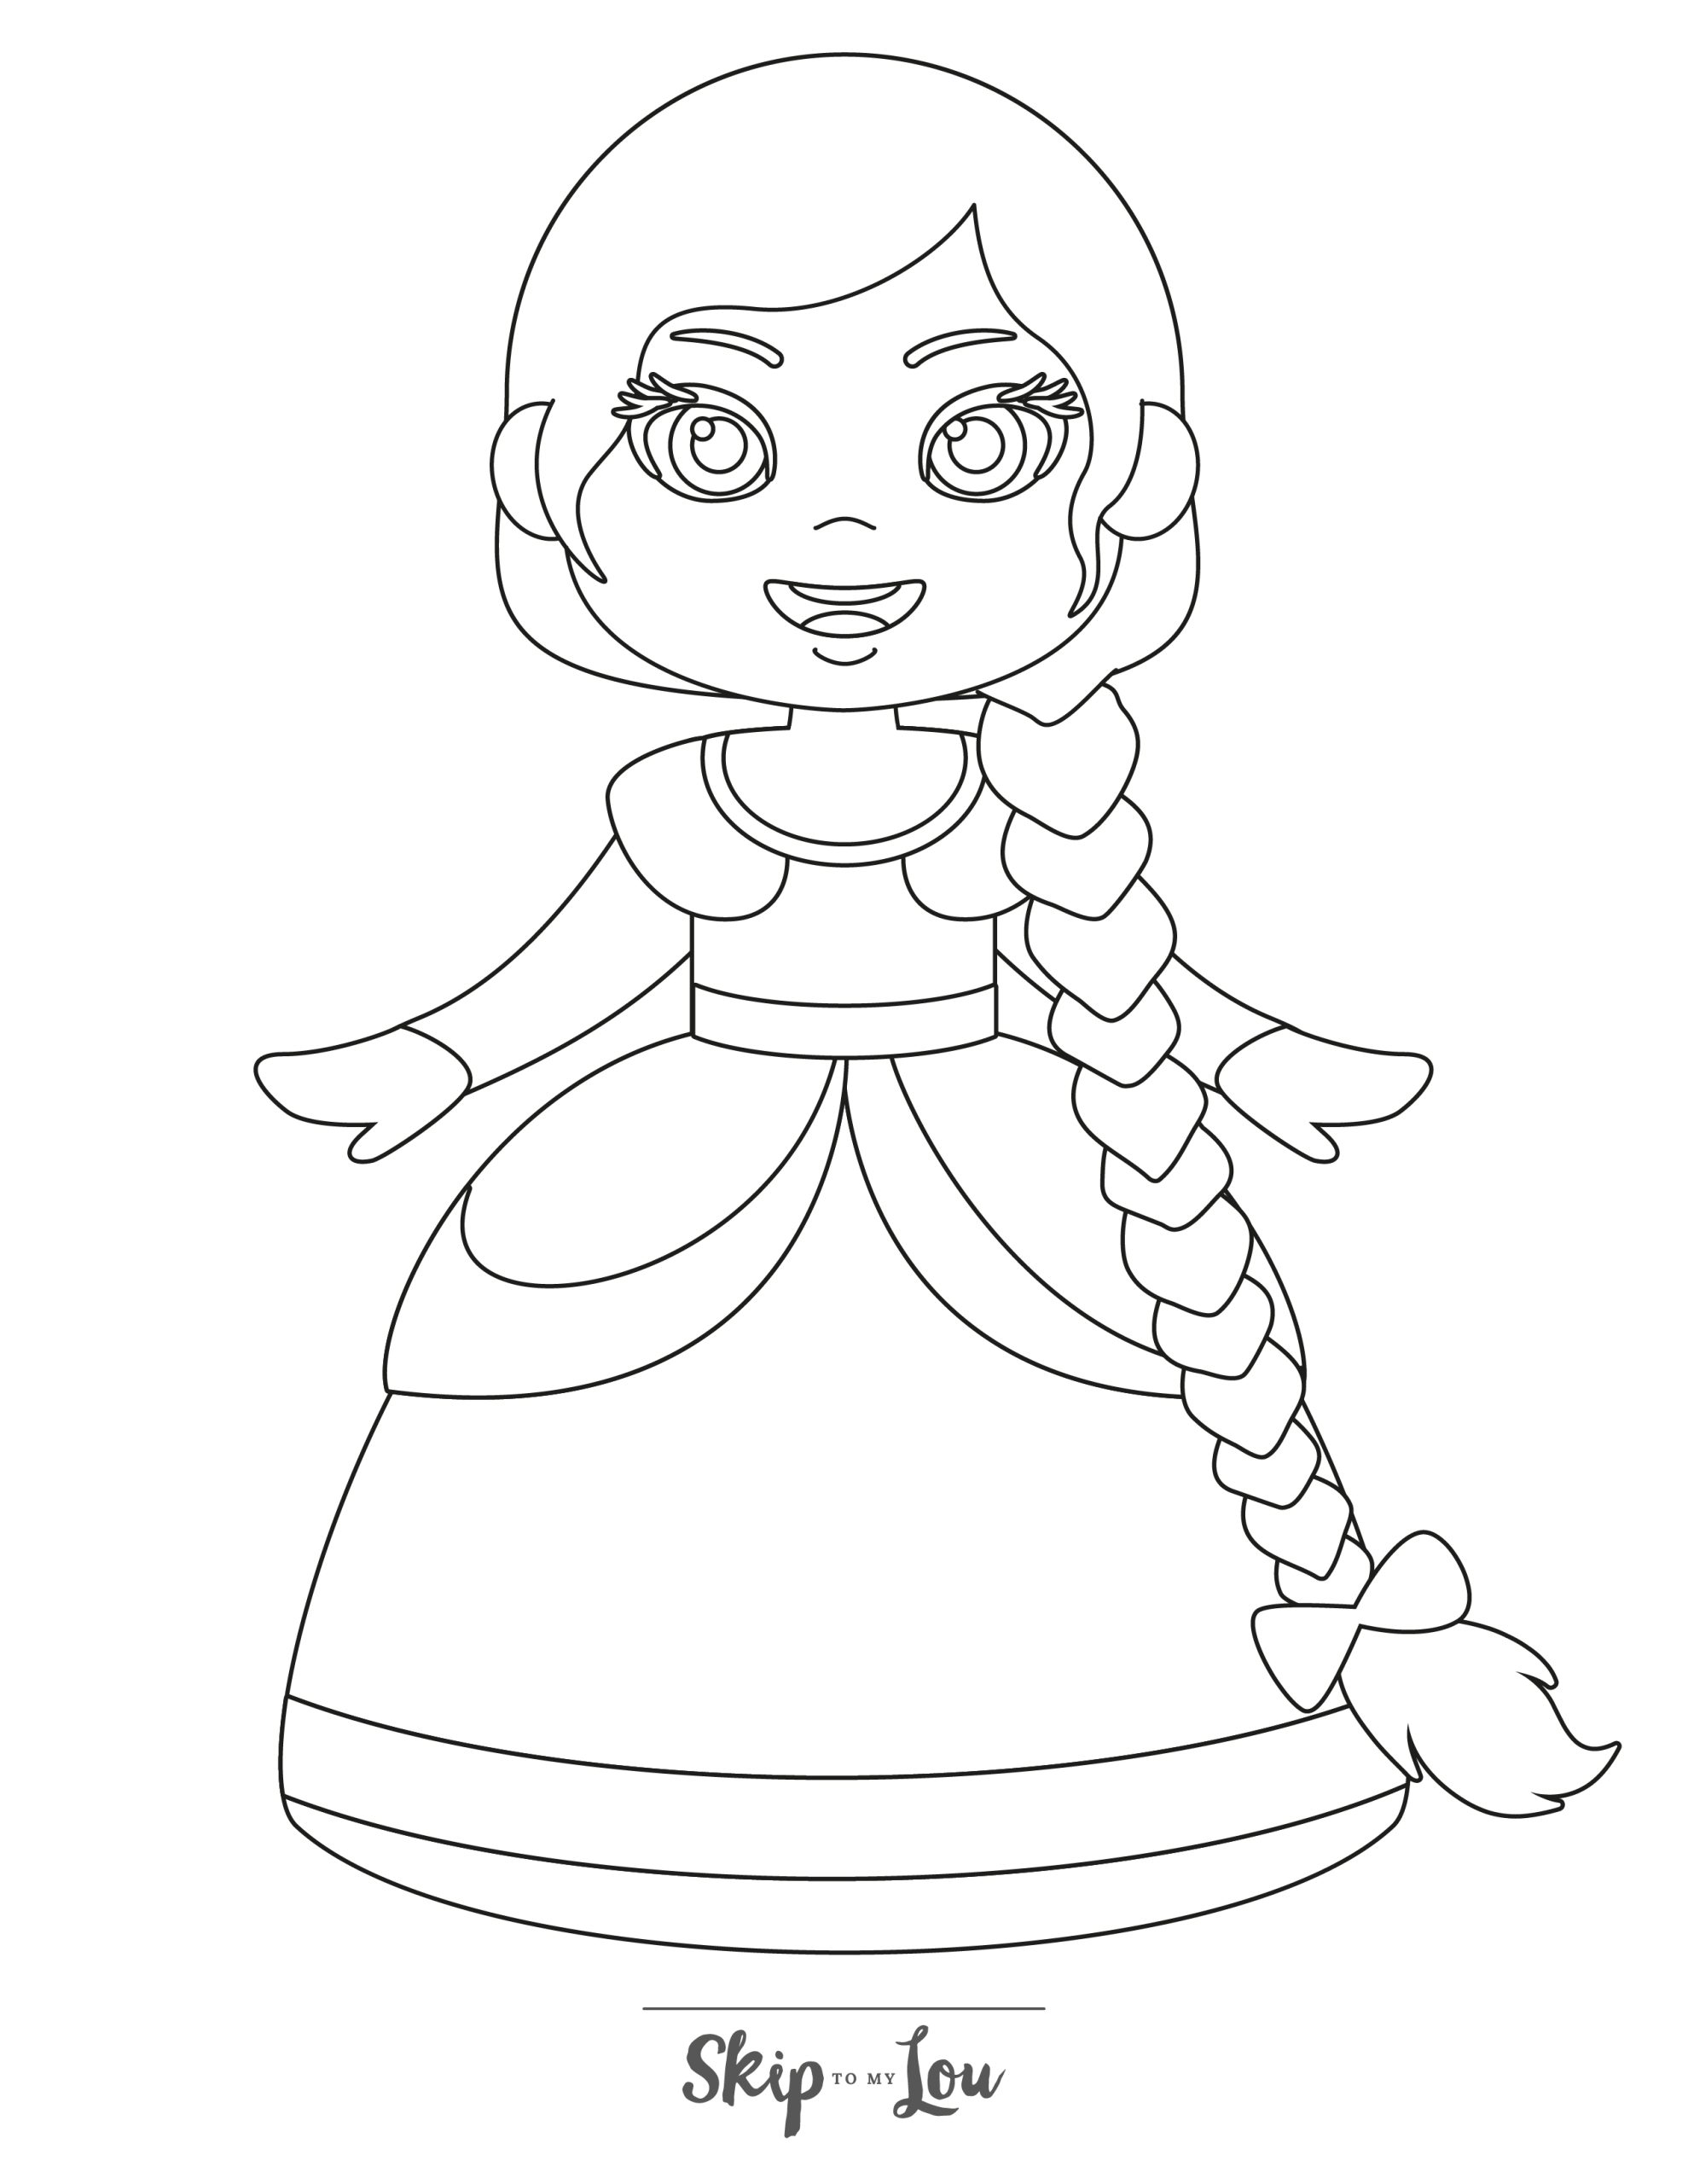 Rapunzel Coloring Page 4 - A cute line drawing of Rapunzel in her dress